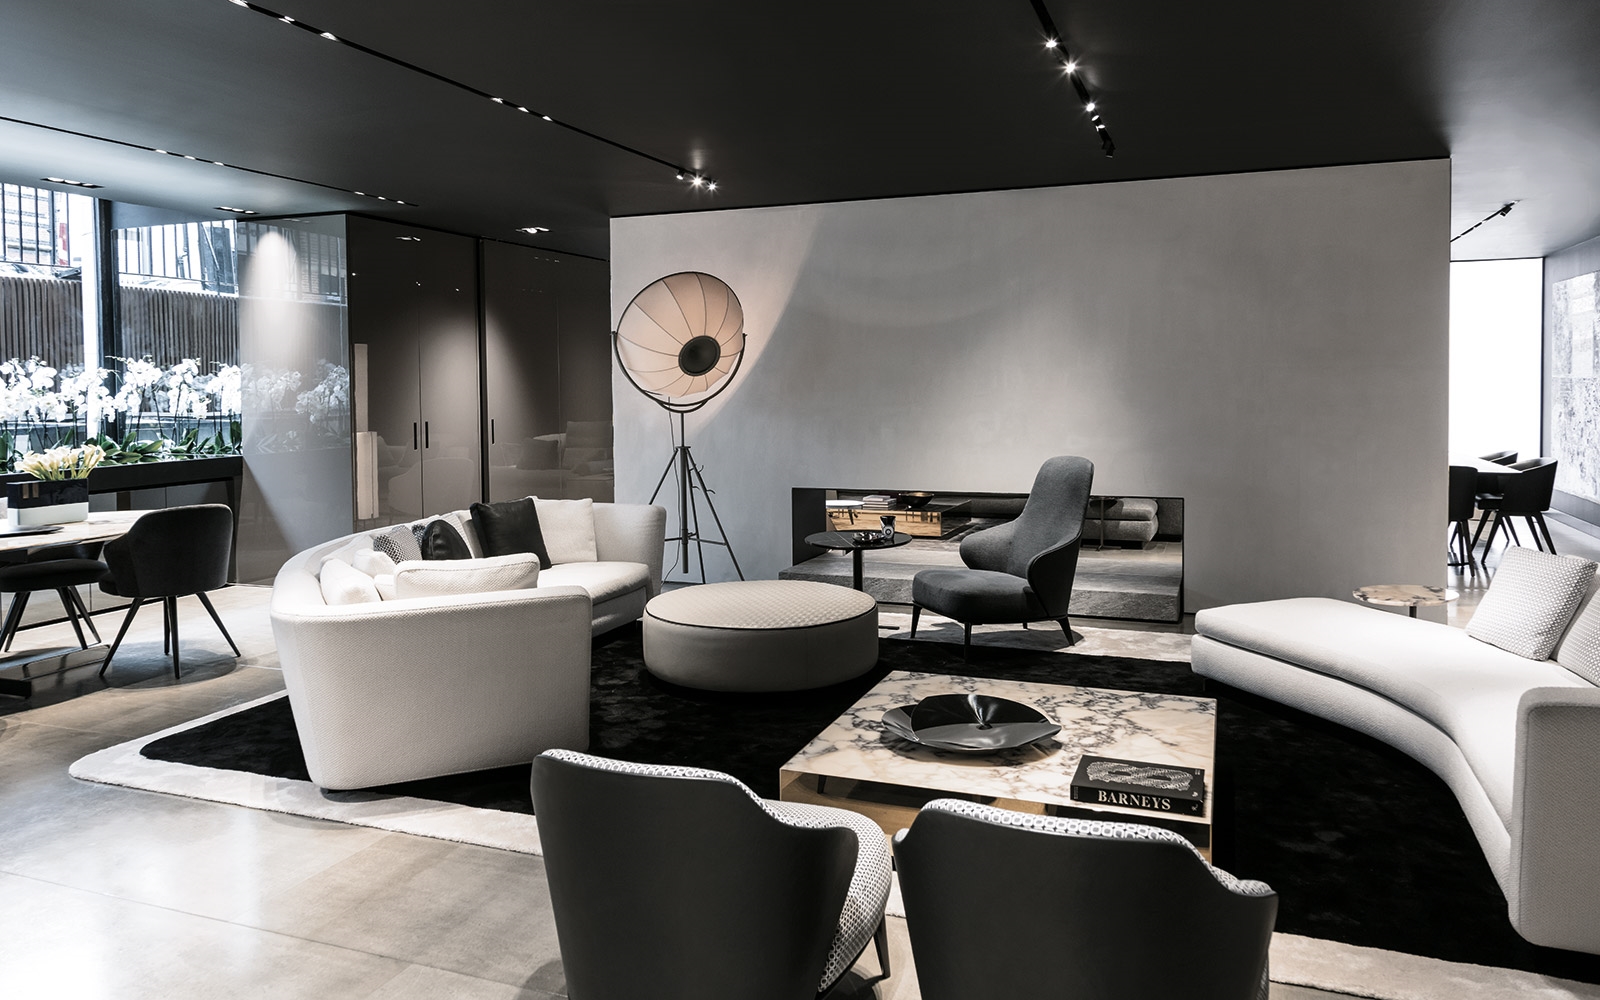 Minotti London doubles its display space